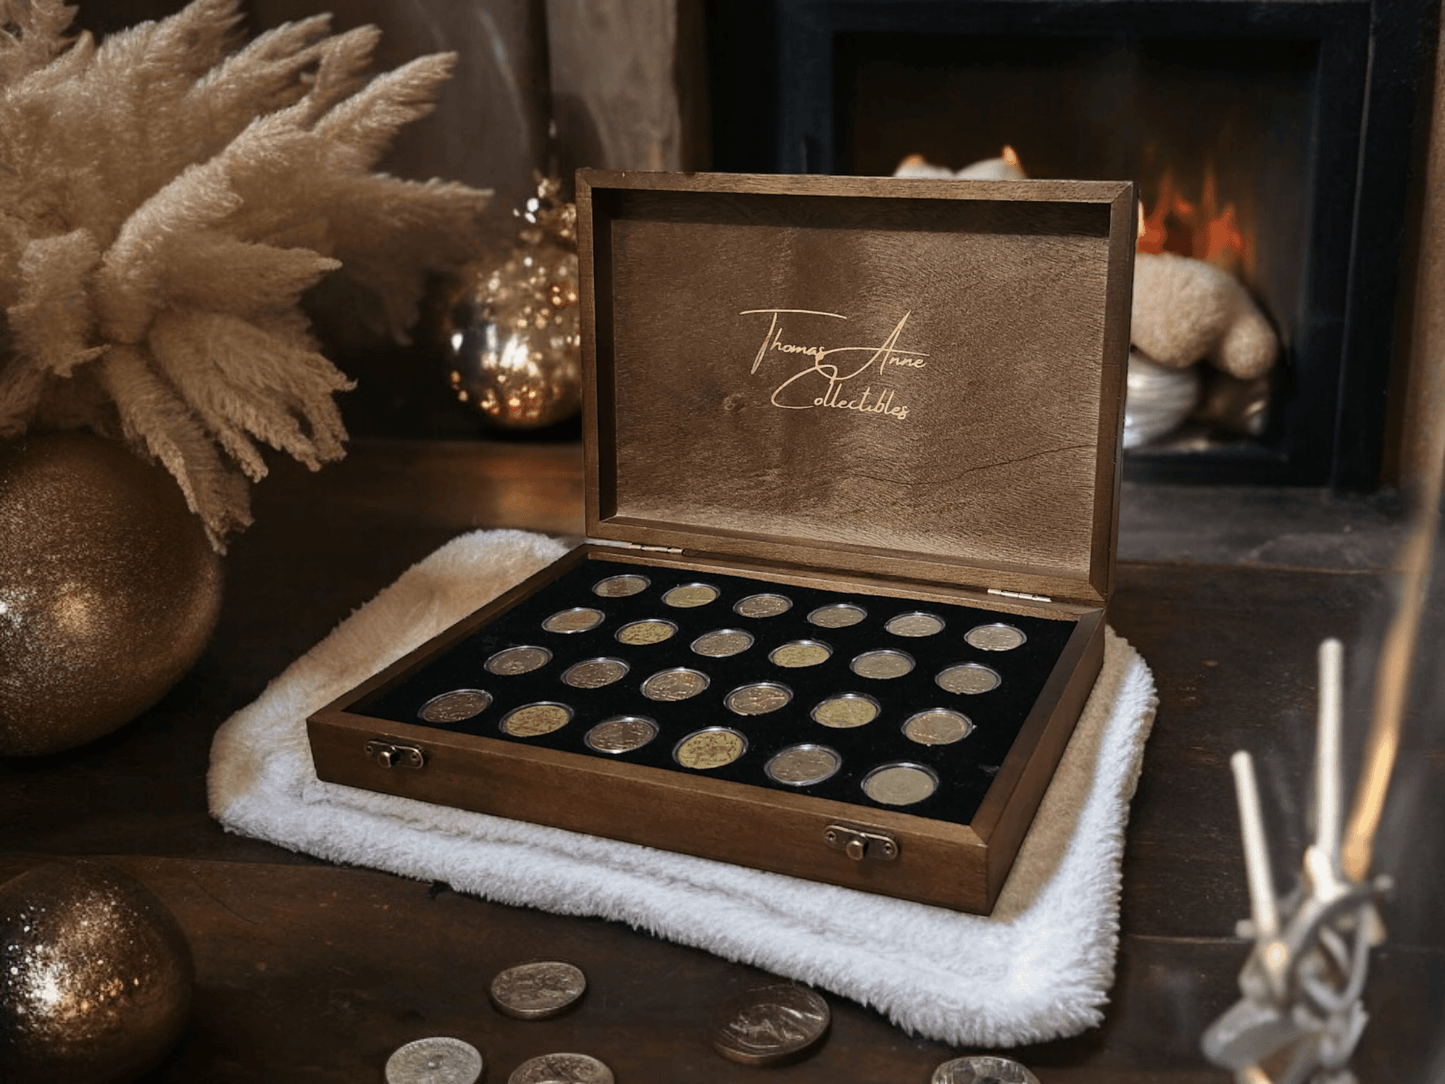 Artisan-Crafted Mahogany Australian $1 Coin Display Case - Thomas Anne Collectibles